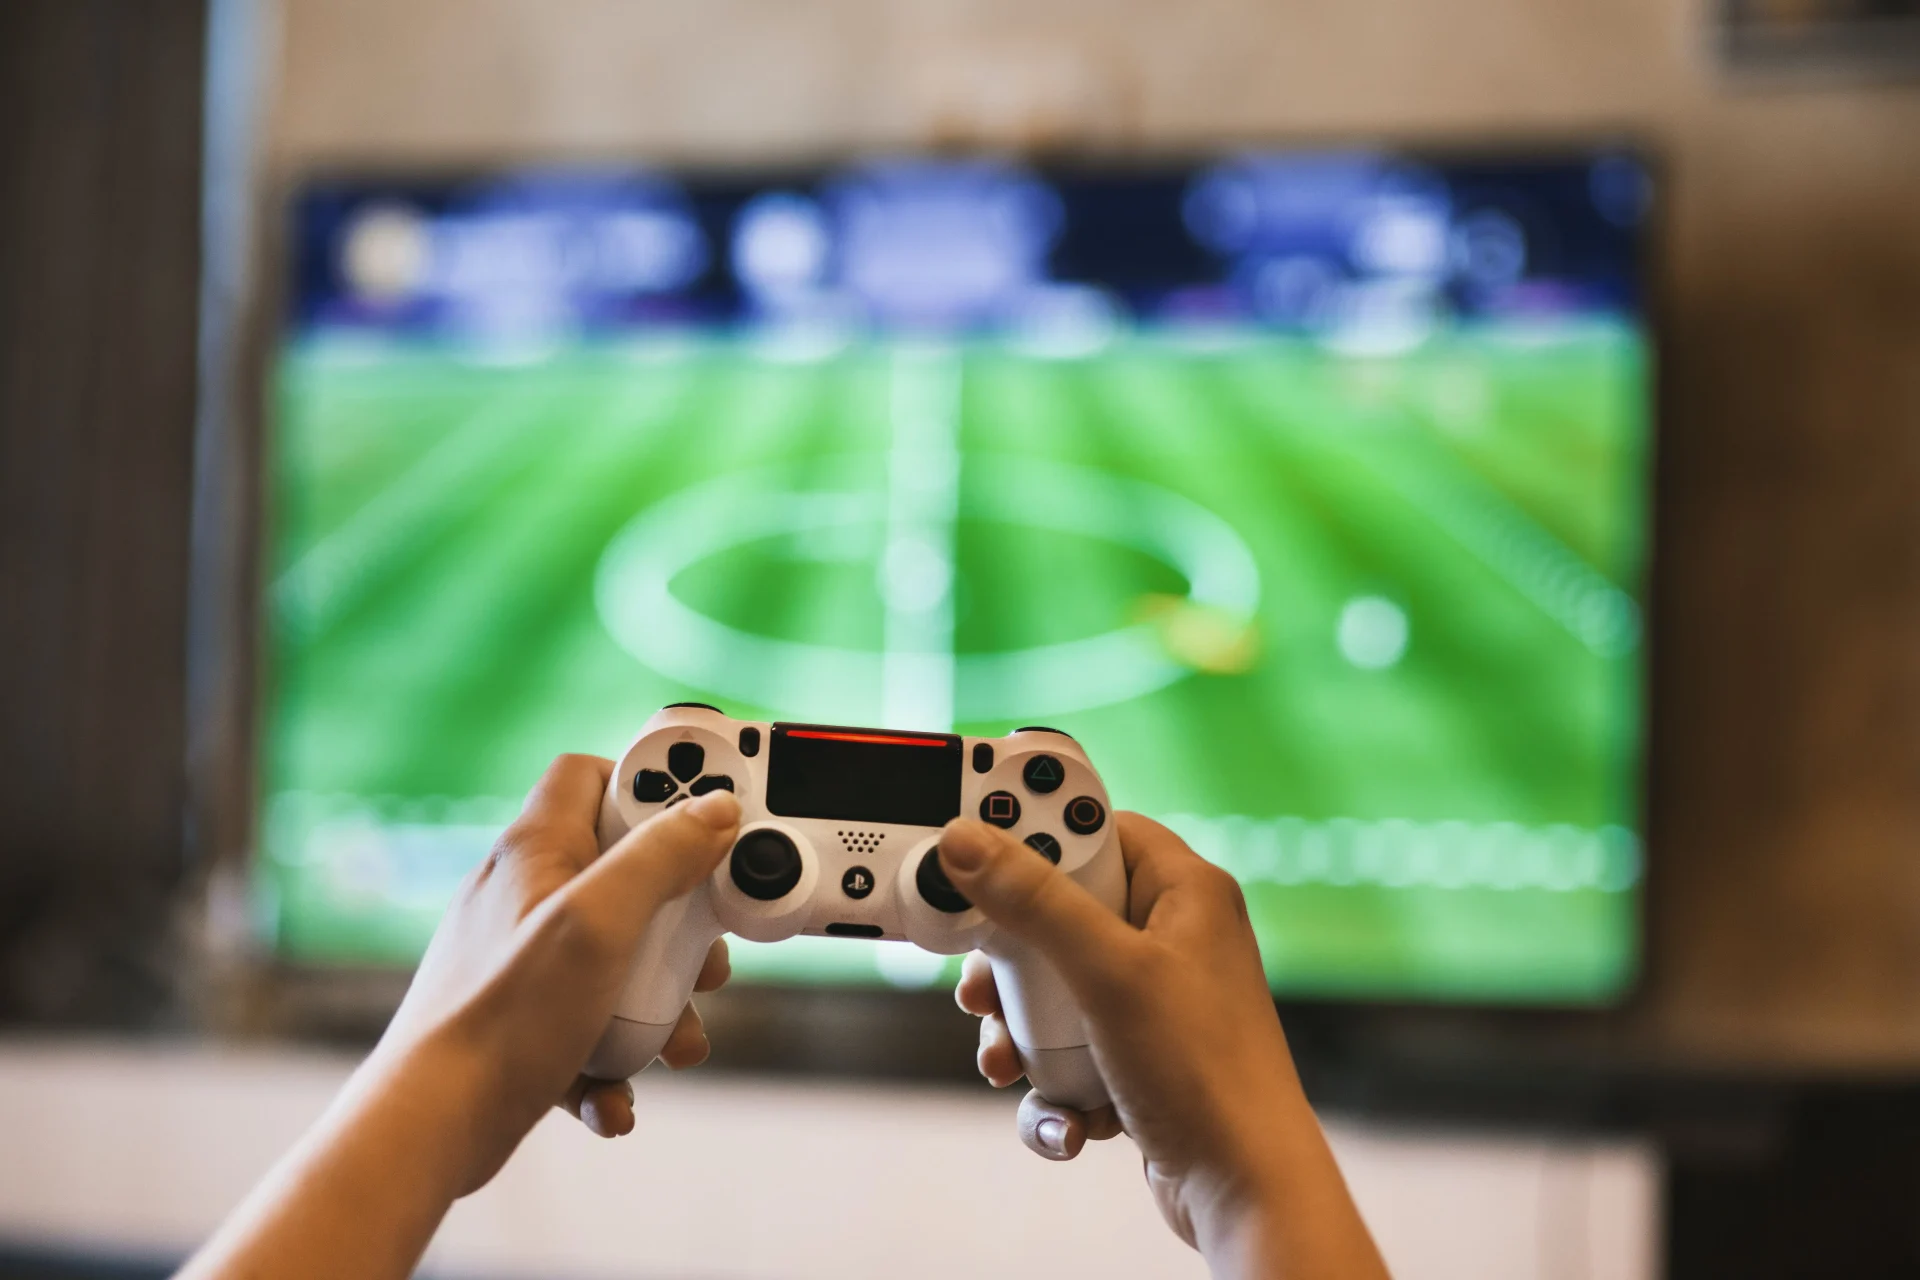 A person holding a video game controller with a TV in the background showing a football game being played, relating to an article about the future of gaming.